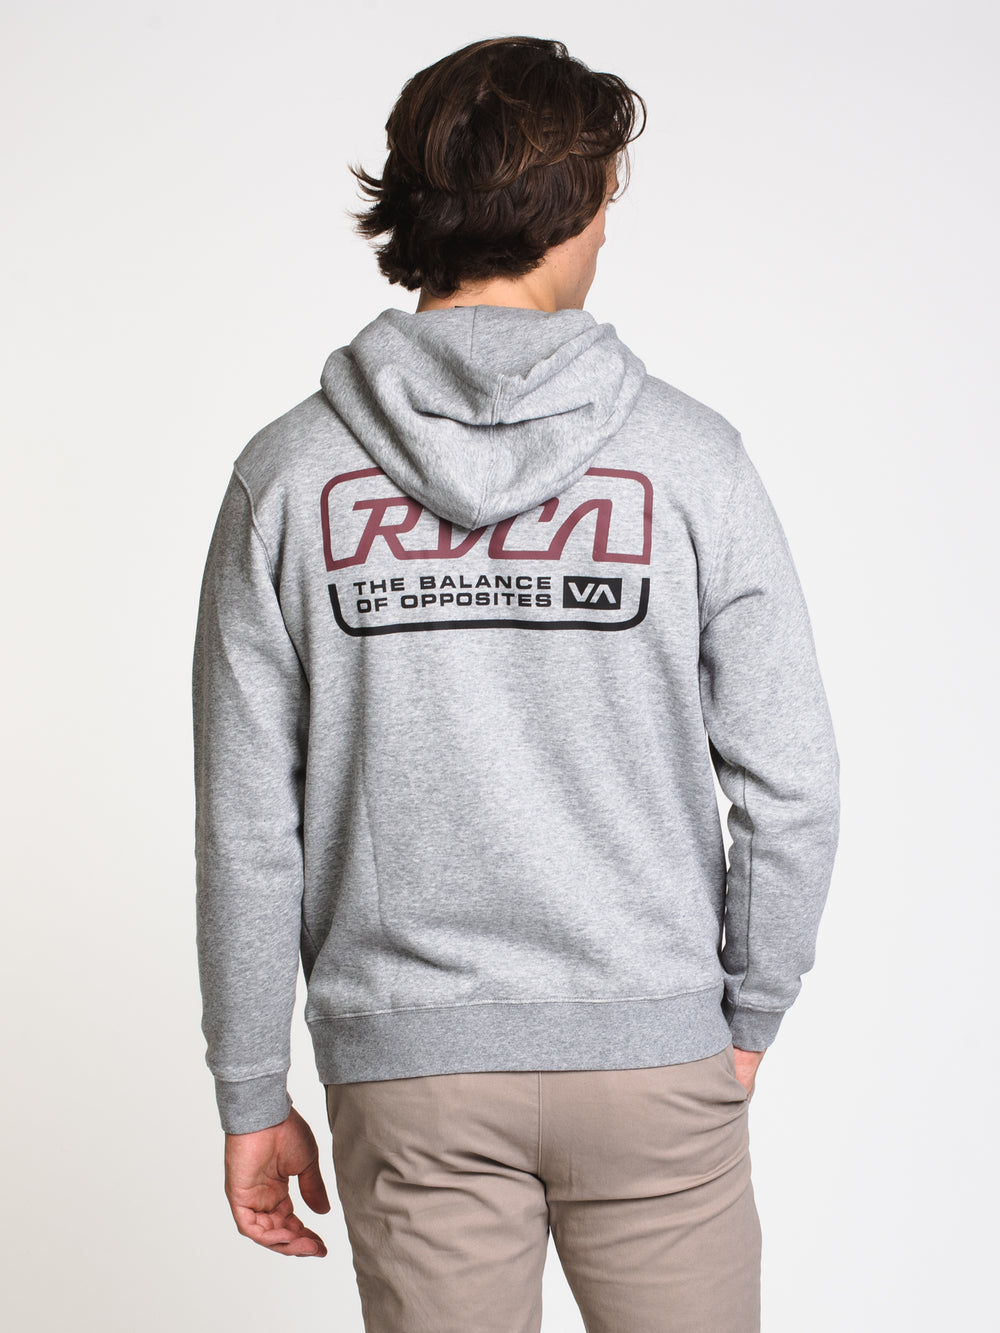 RVCA TRANSMISSION PULLOVER HOODIE  - CLEARANCE